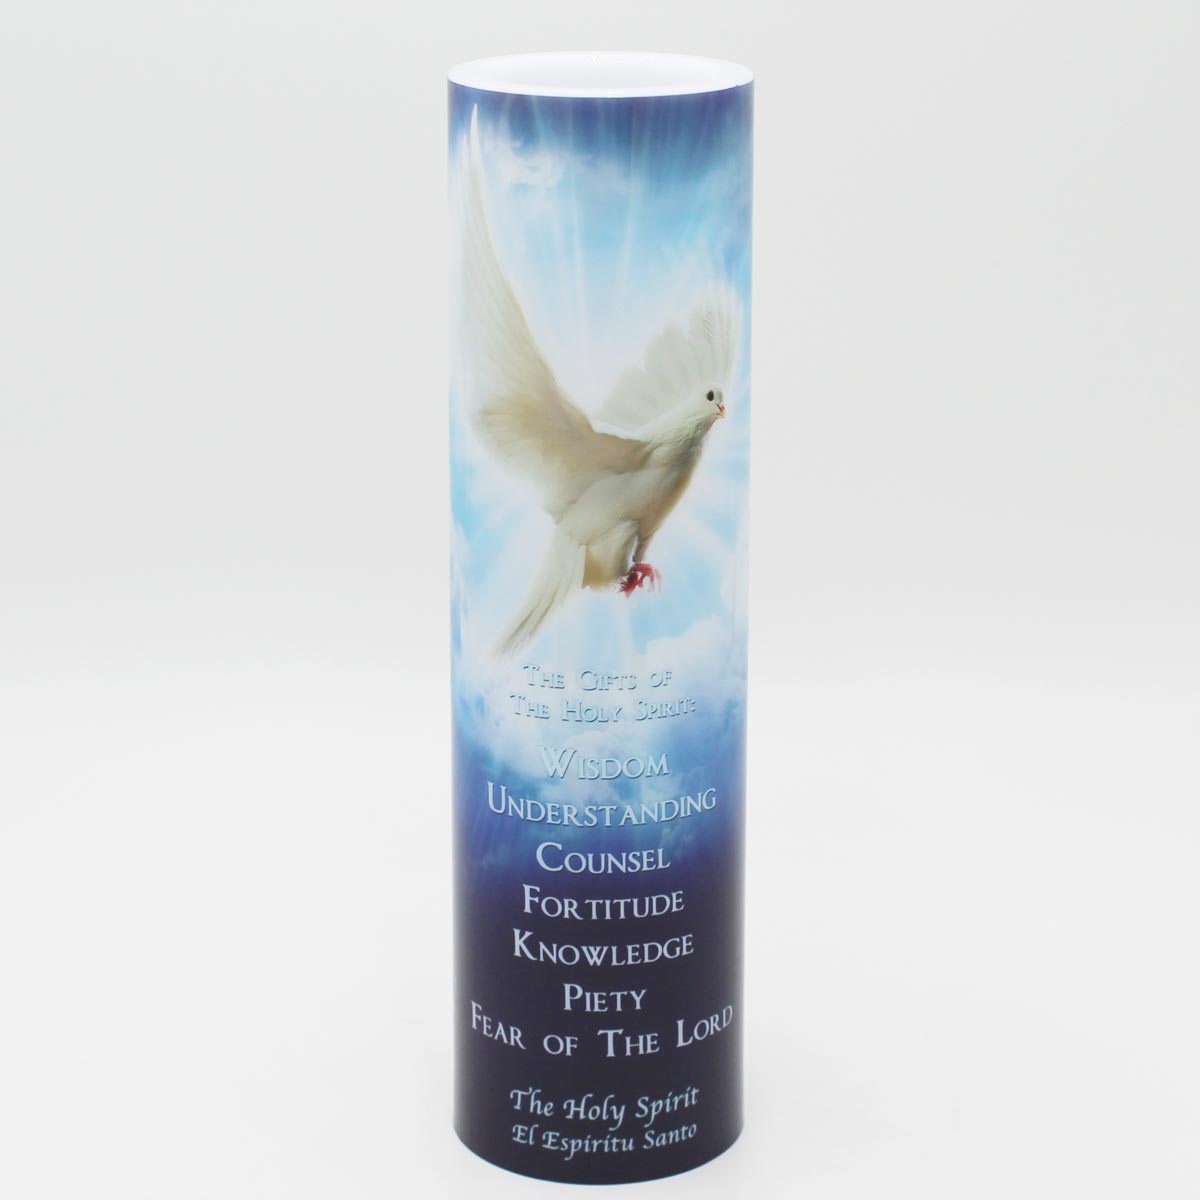 Rotating base for 2.3x8 and 4x7 candles - The Saints Collection